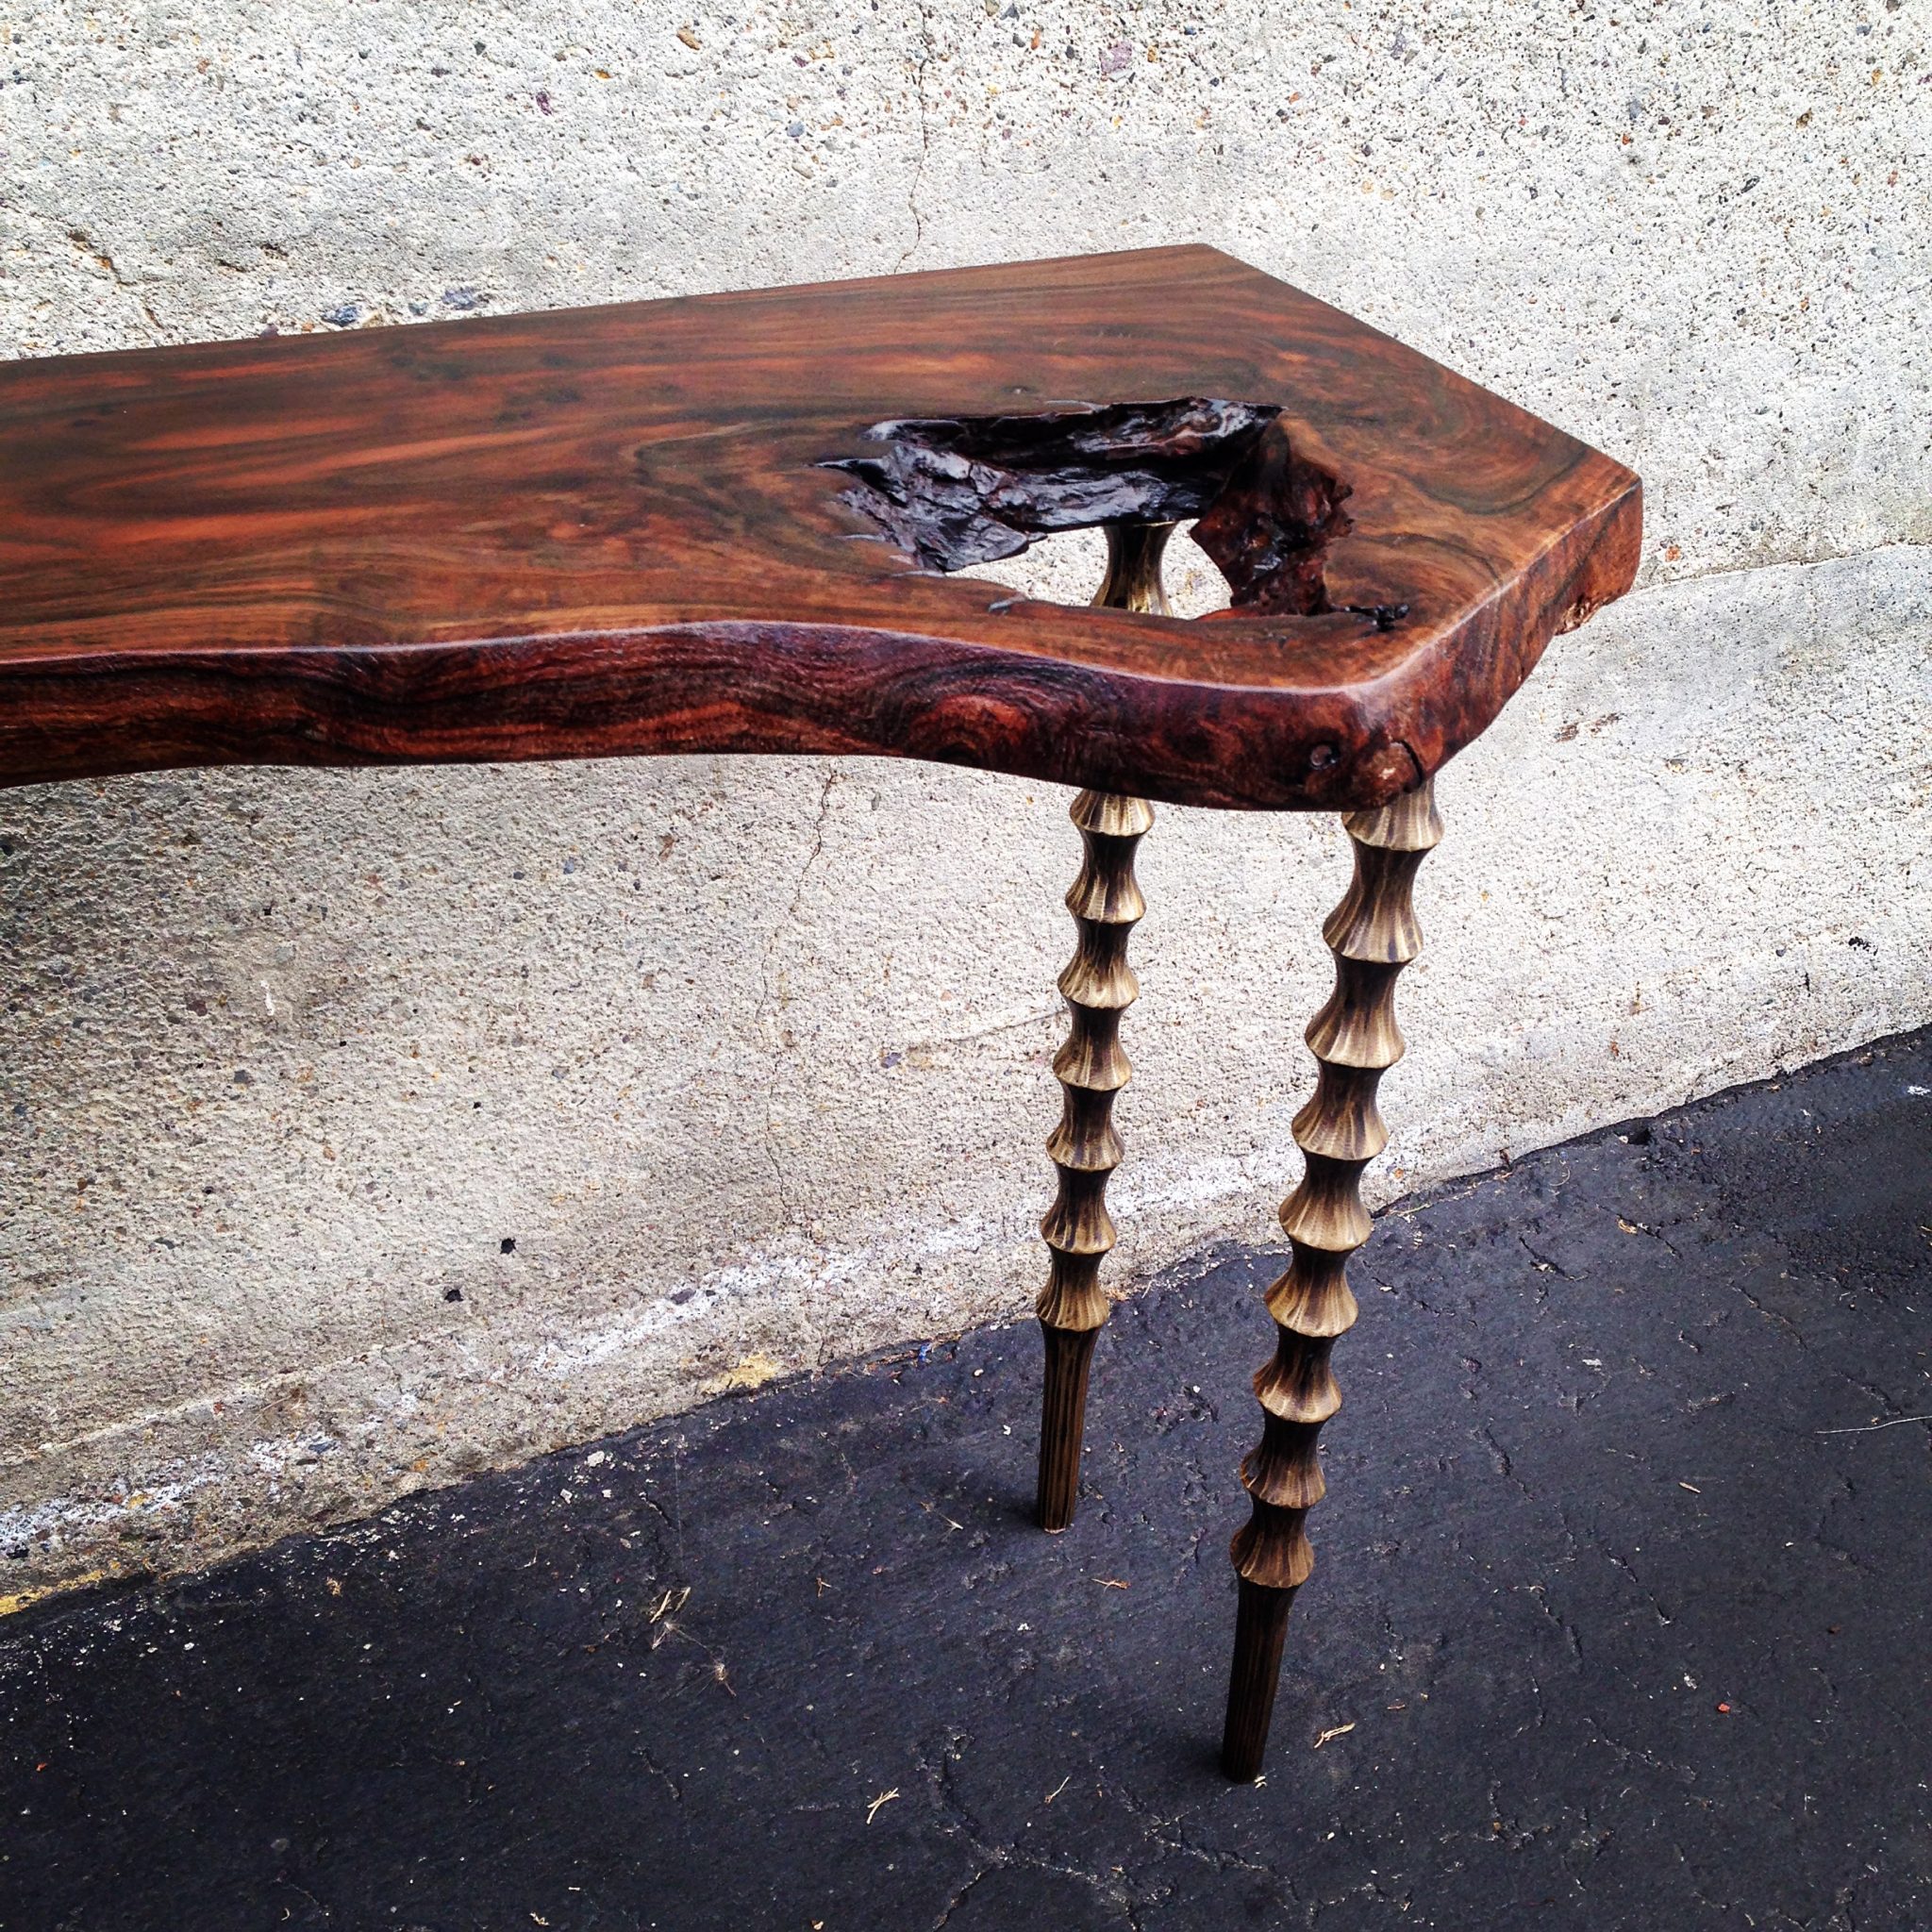 Live edge wood slab side table with carved wood legs